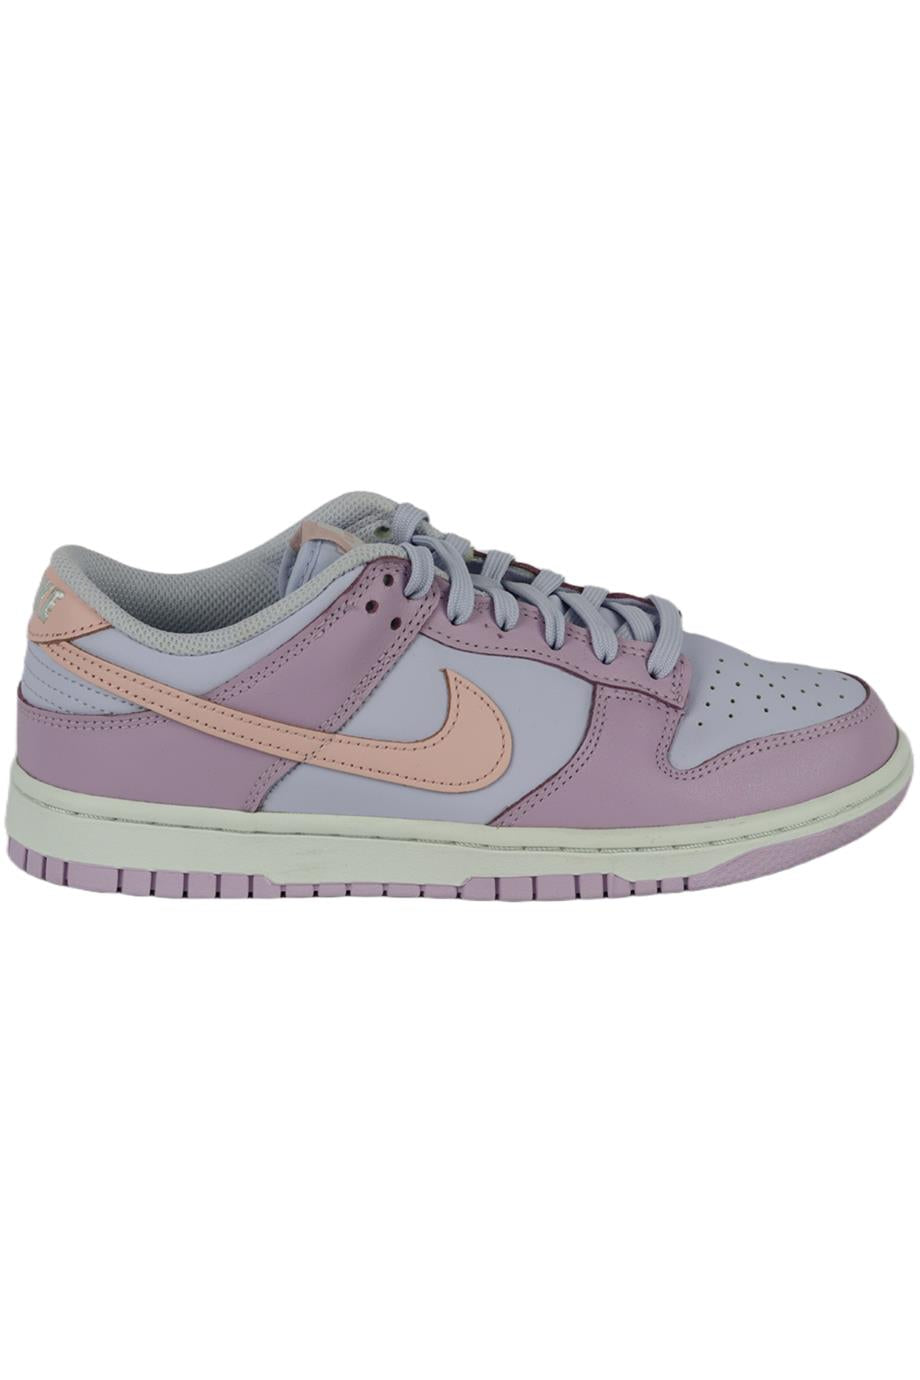 NIKE DUNK LOW EASTER LEATHER SNEAKERS EU 39 UK 5.5 US 8